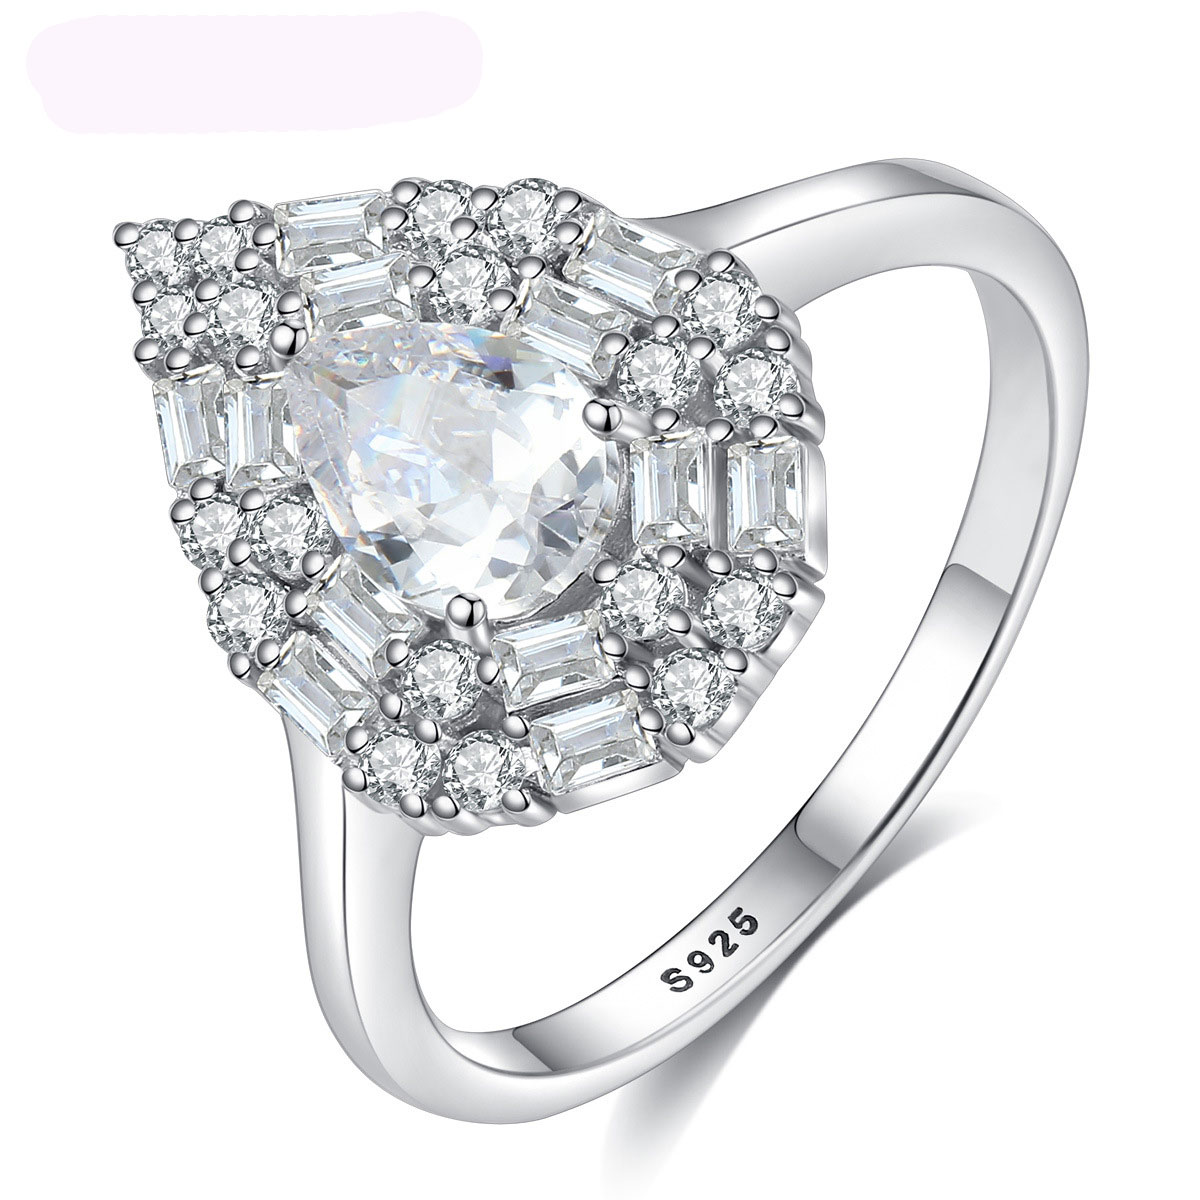 3A Cz Drop Design Full-Body Sterling Silver Ring